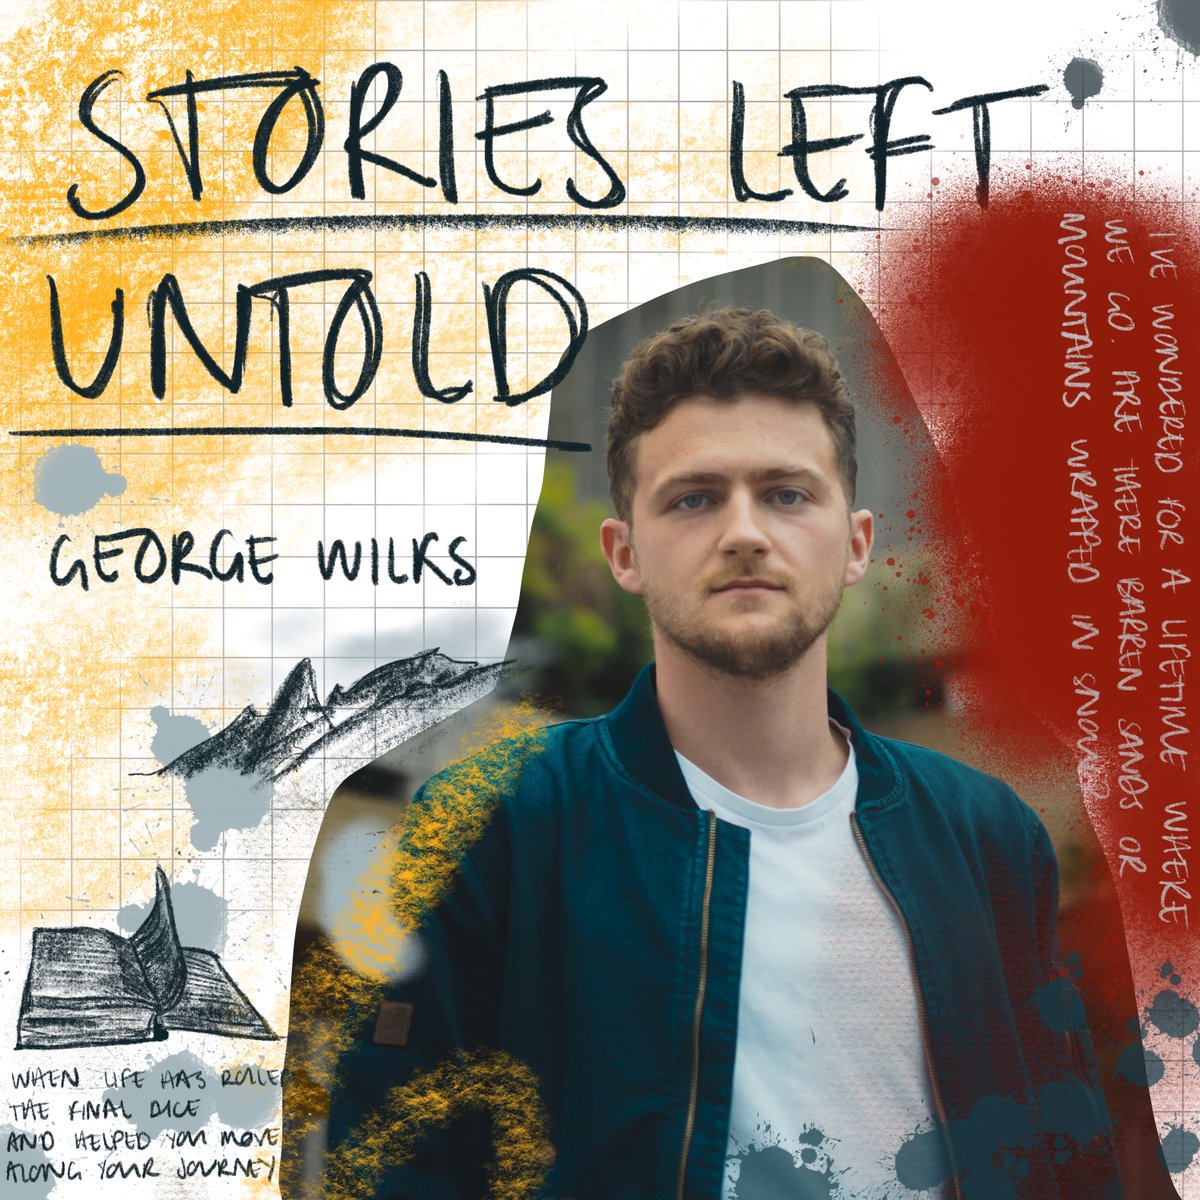 My debut EP 'Stories Left Untold' is OUT NOW!! Available at georgewilks.com, all streaming services and @Bandcamp ! Links below! I hope you love it⬇️ Enjoy x Spotify: open.spotify.com/album/759UoFul… Bandcamp: georgewilks.bandcamp.com Apple Music: music.apple.com/gb/album/stori…